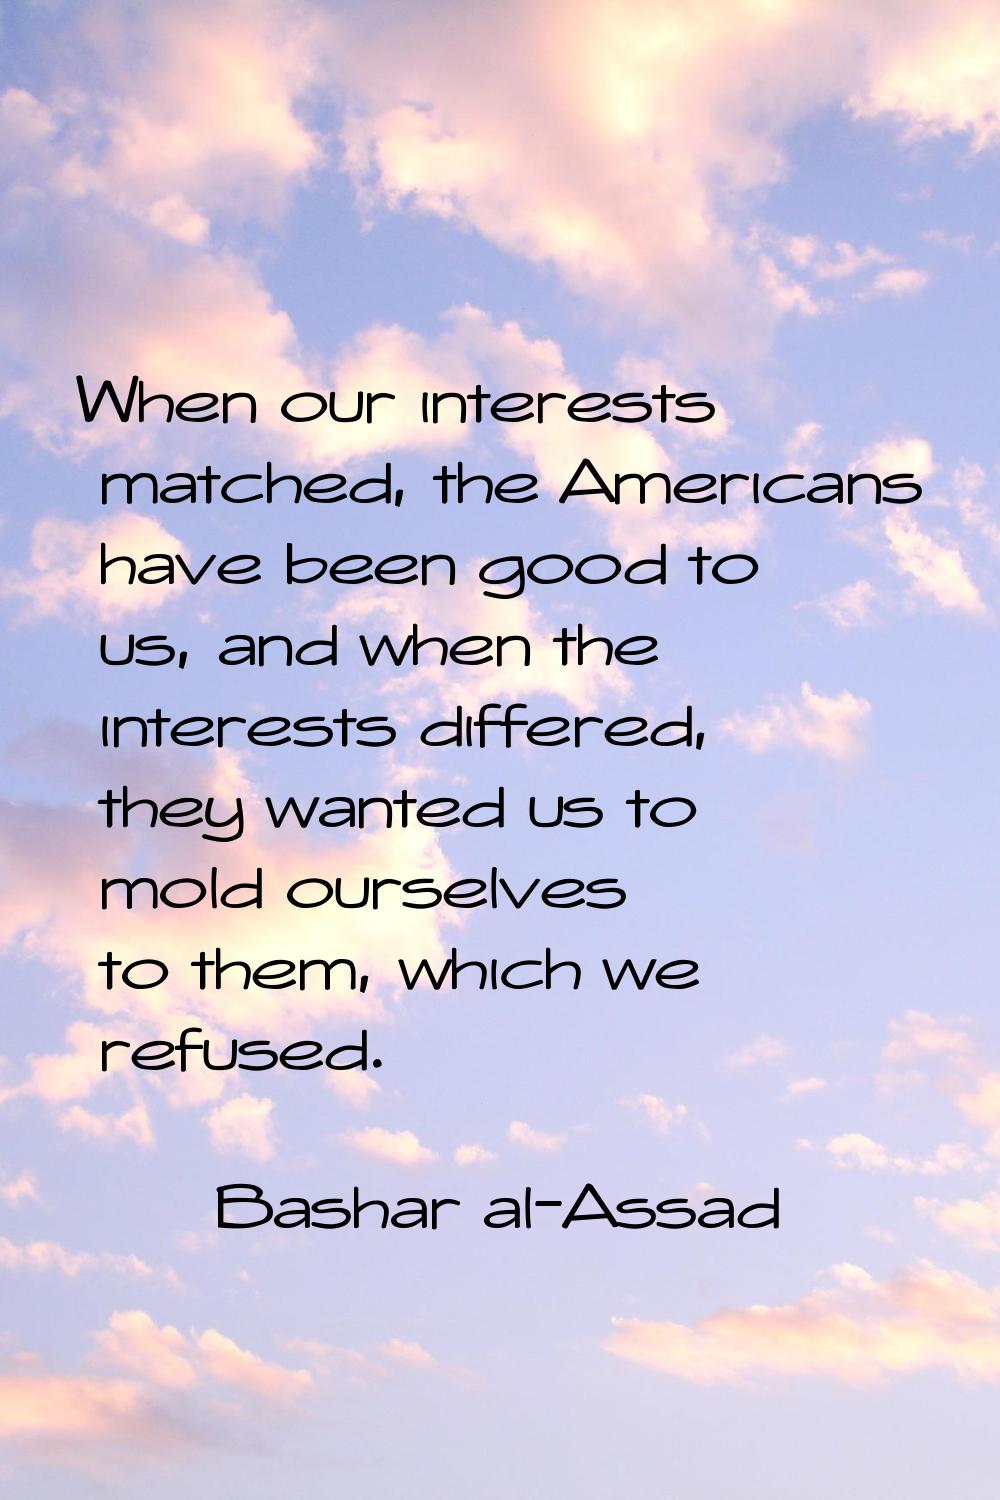 When our interests matched, the Americans have been good to us, and when the interests differed, th